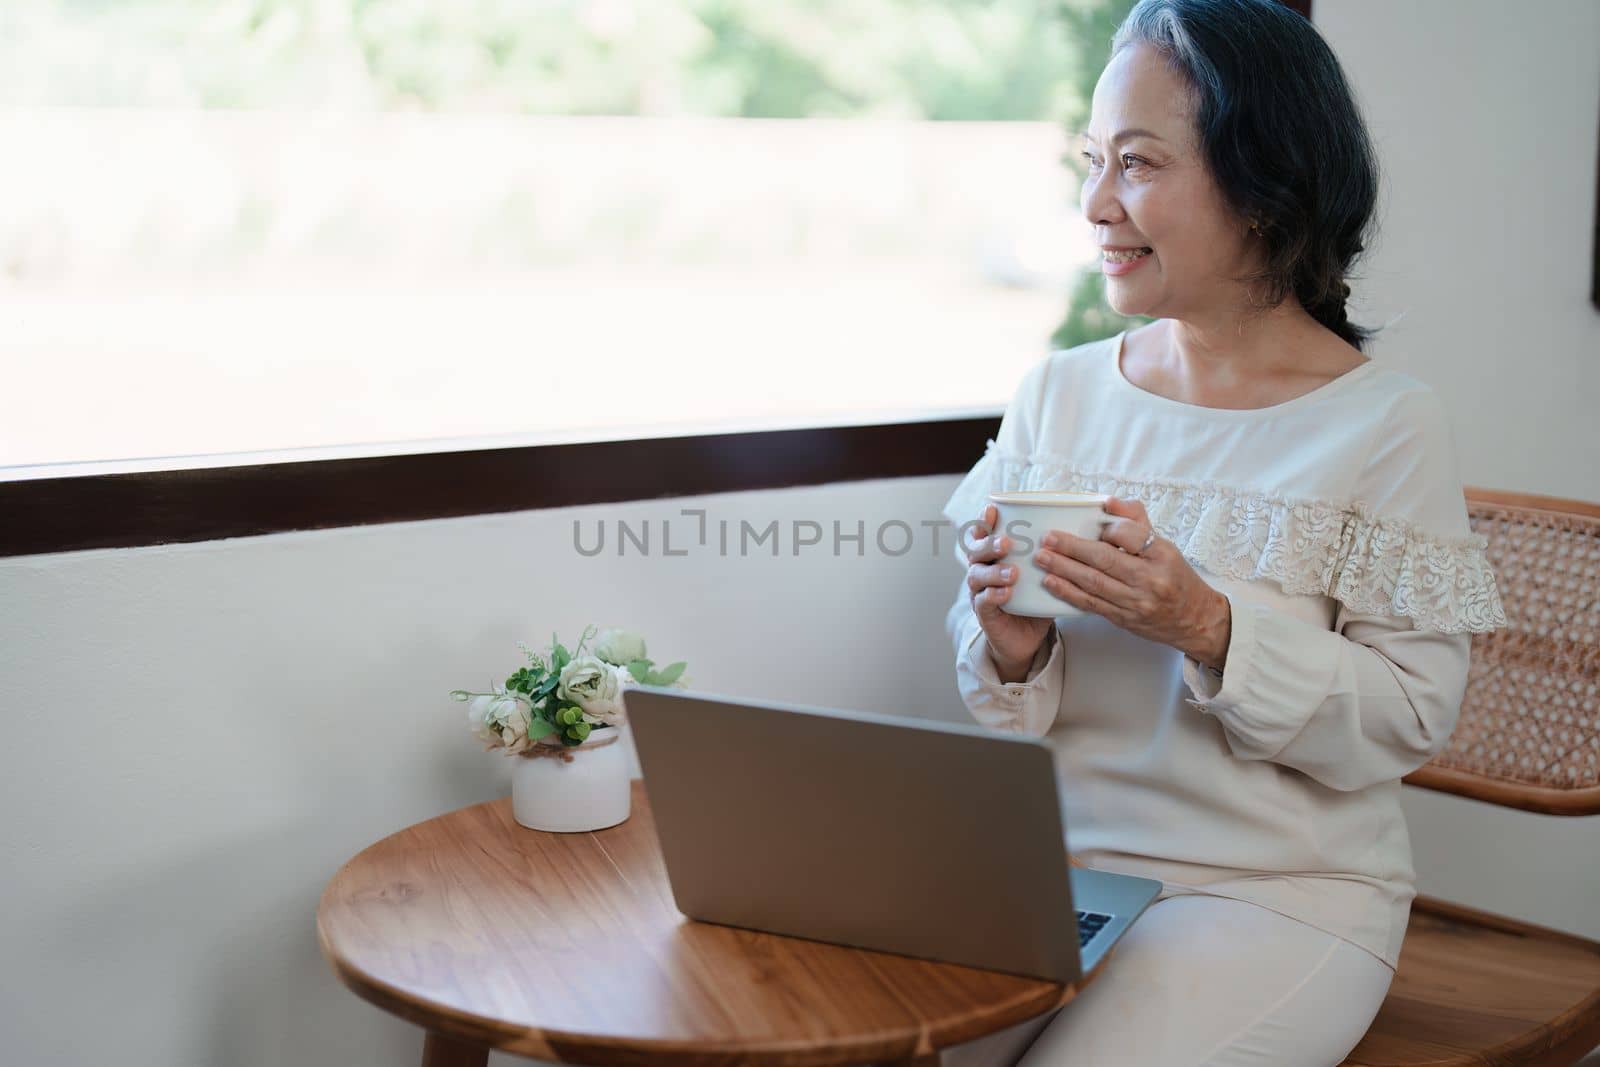 Portrait of an elderly Asian woman in modern pose doing computer work and drinking coffee